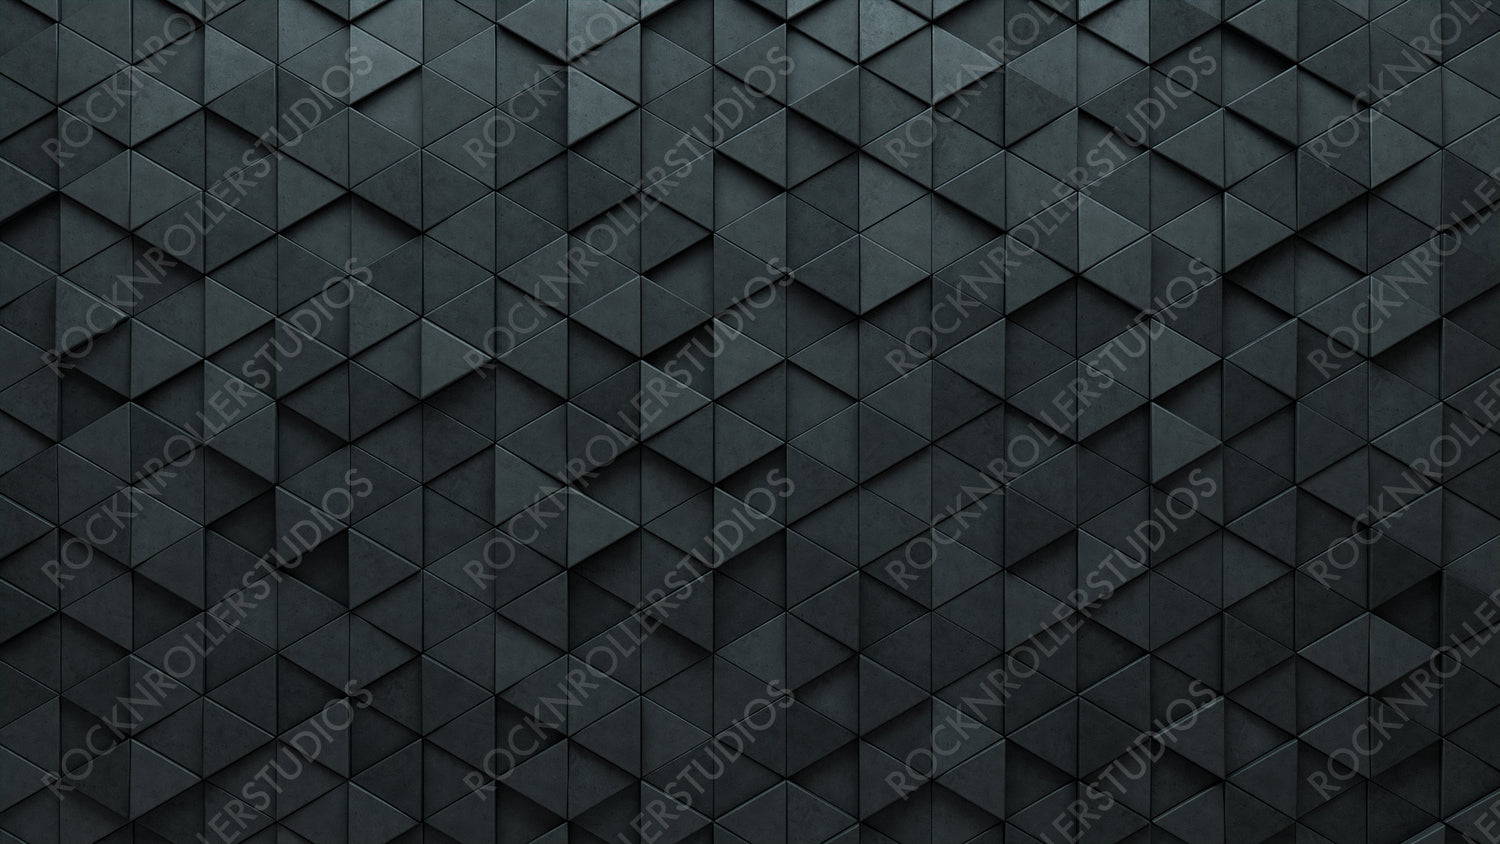 Triangular Tiles arranged to create a 3D wall. Concrete, Futuristic Background formed from Polished blocks. 3D Render